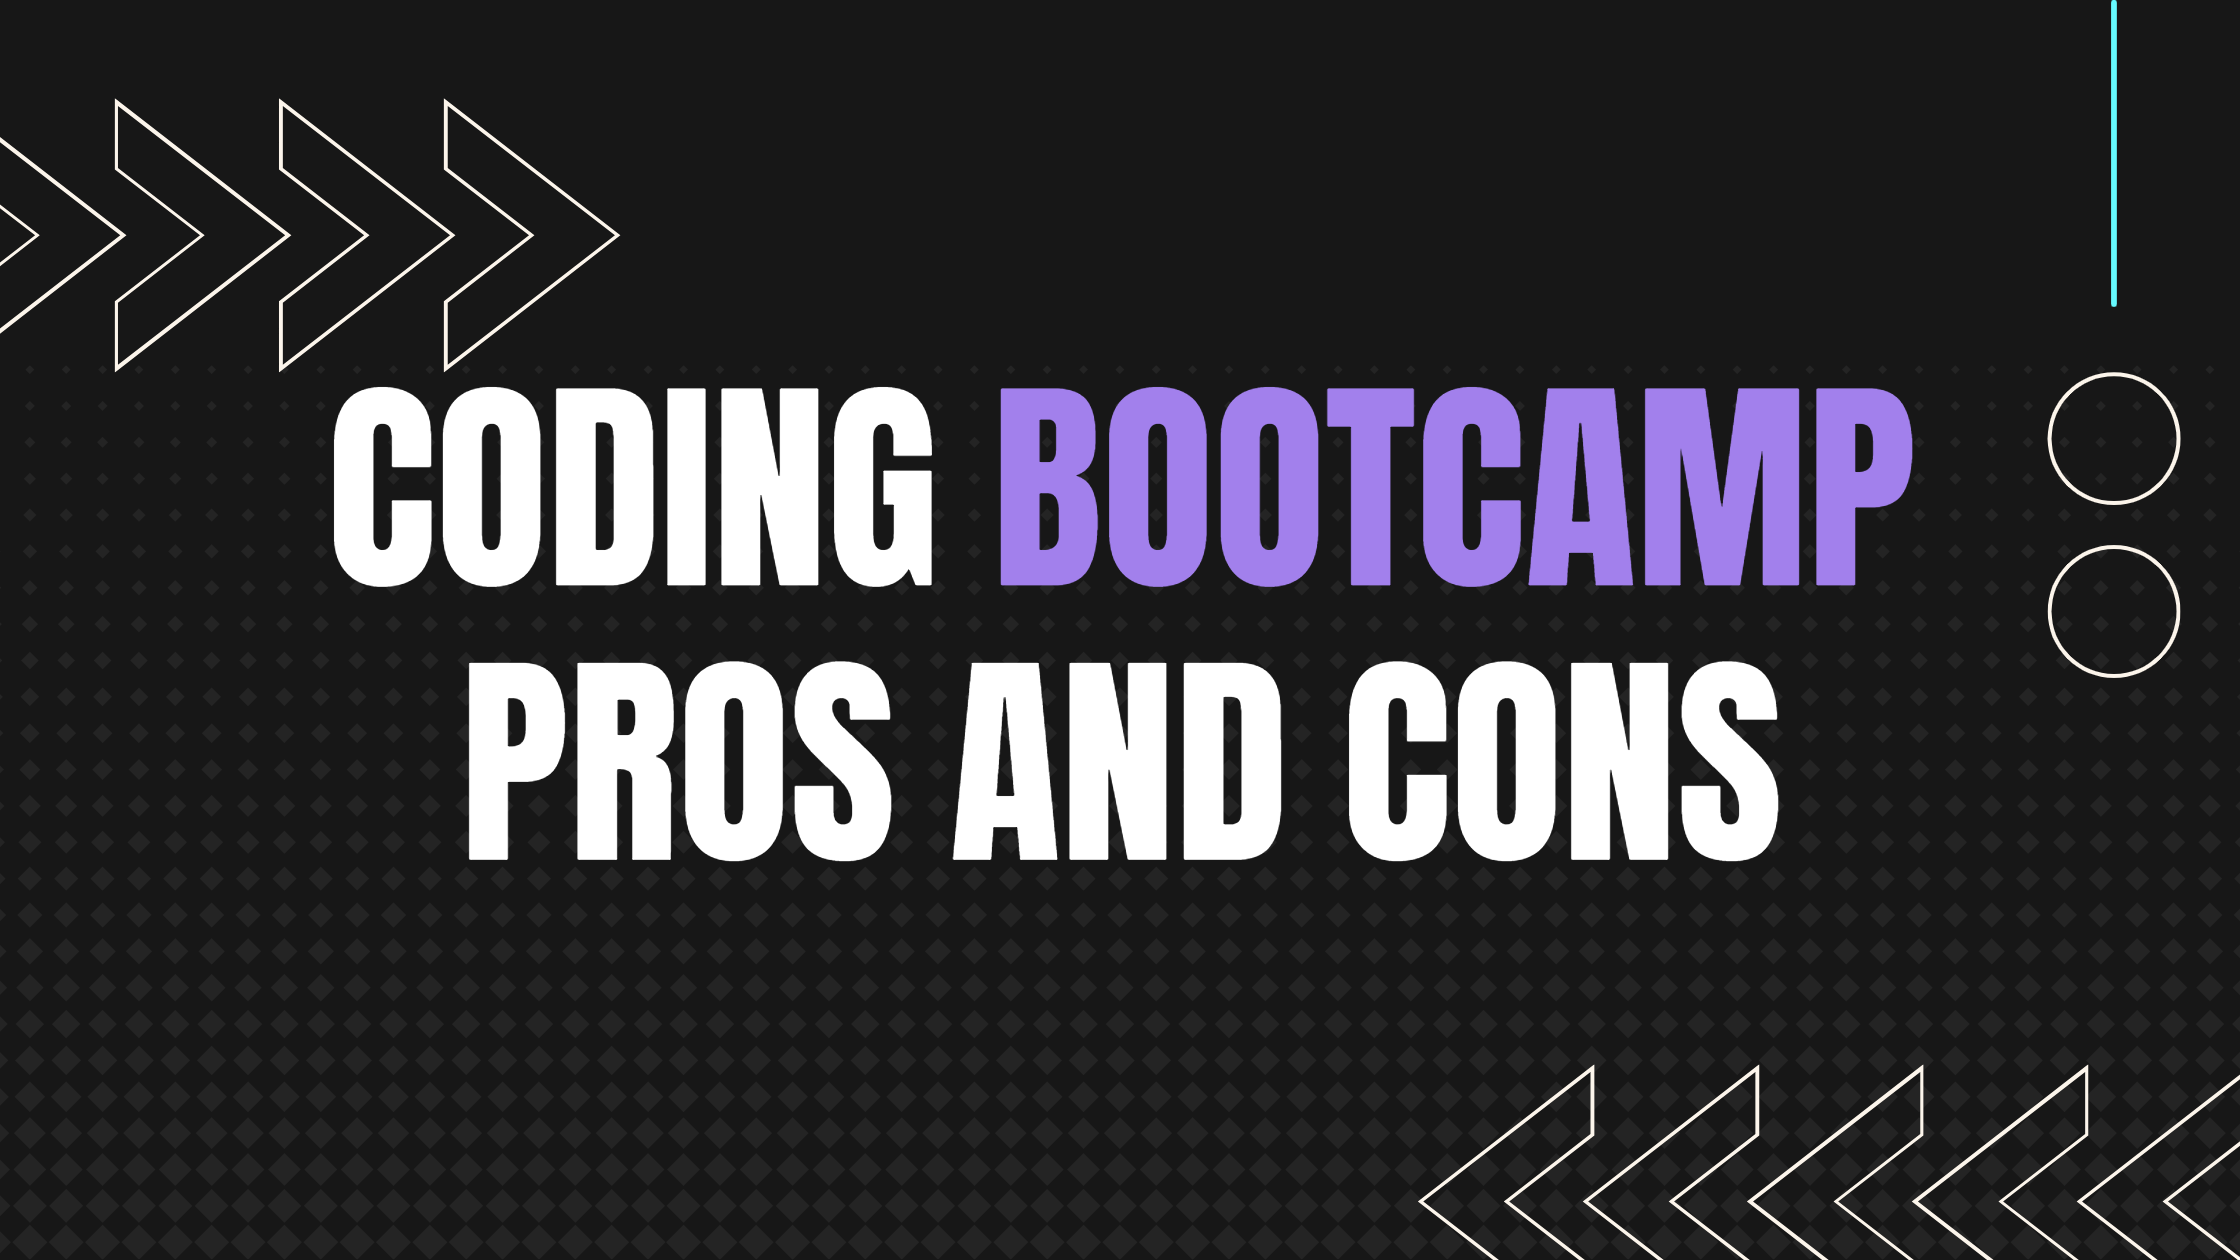 The pros and cons of attending a coding bootcamp